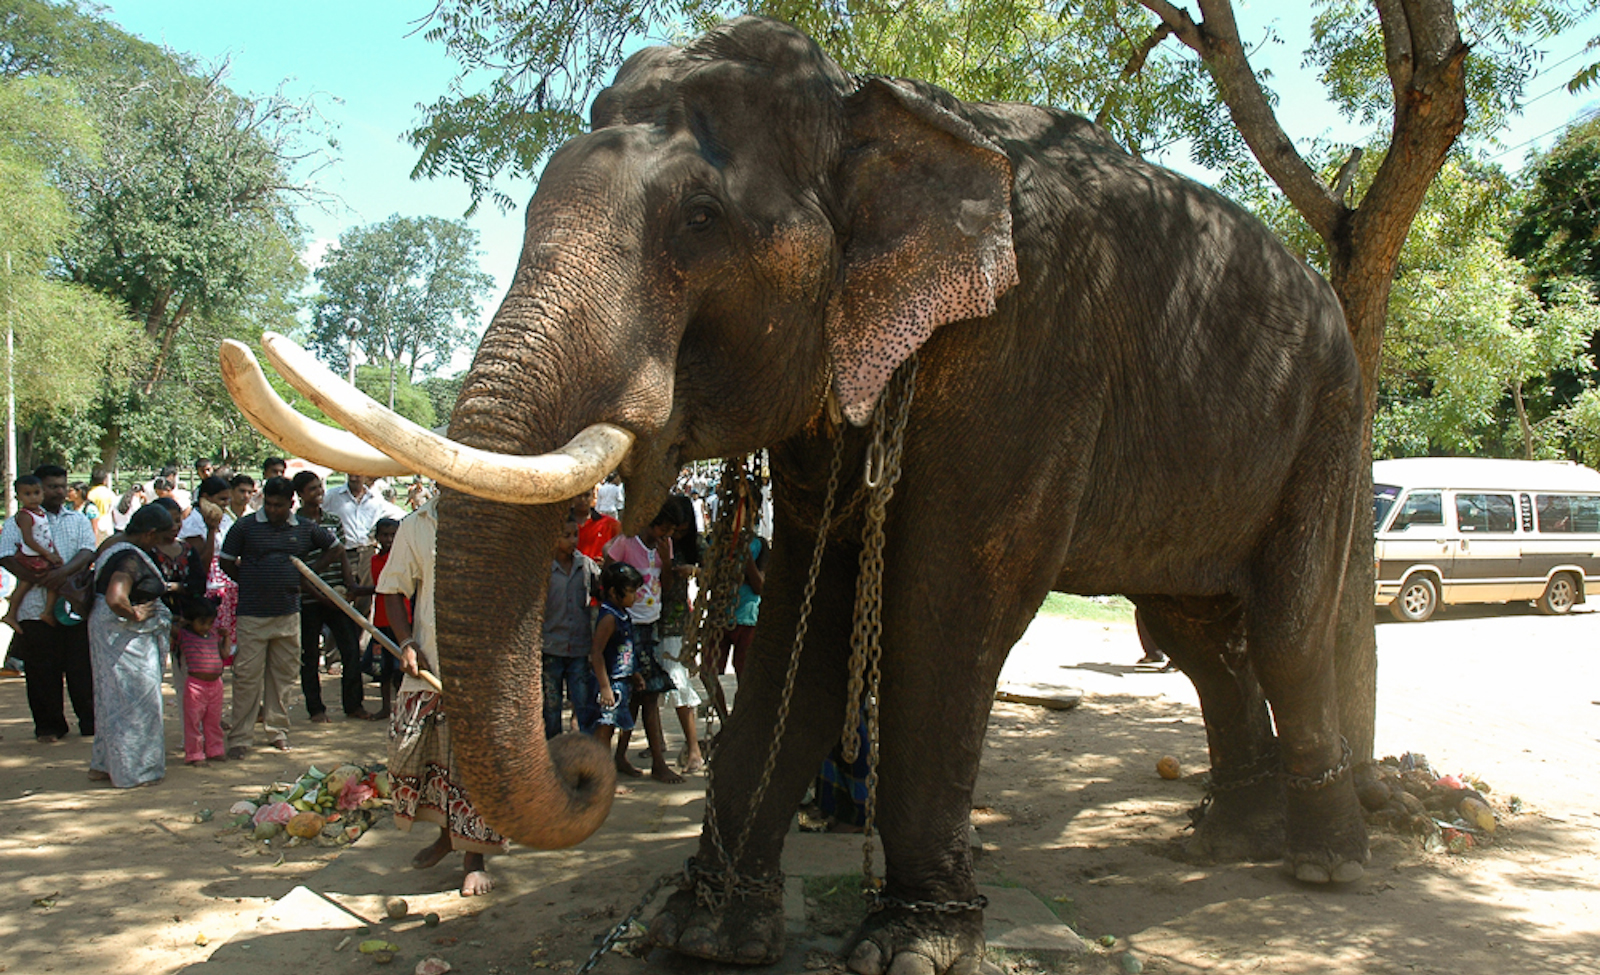 EXPOSED! Namuang Safari Park is a Place for Cruelty and Corruption